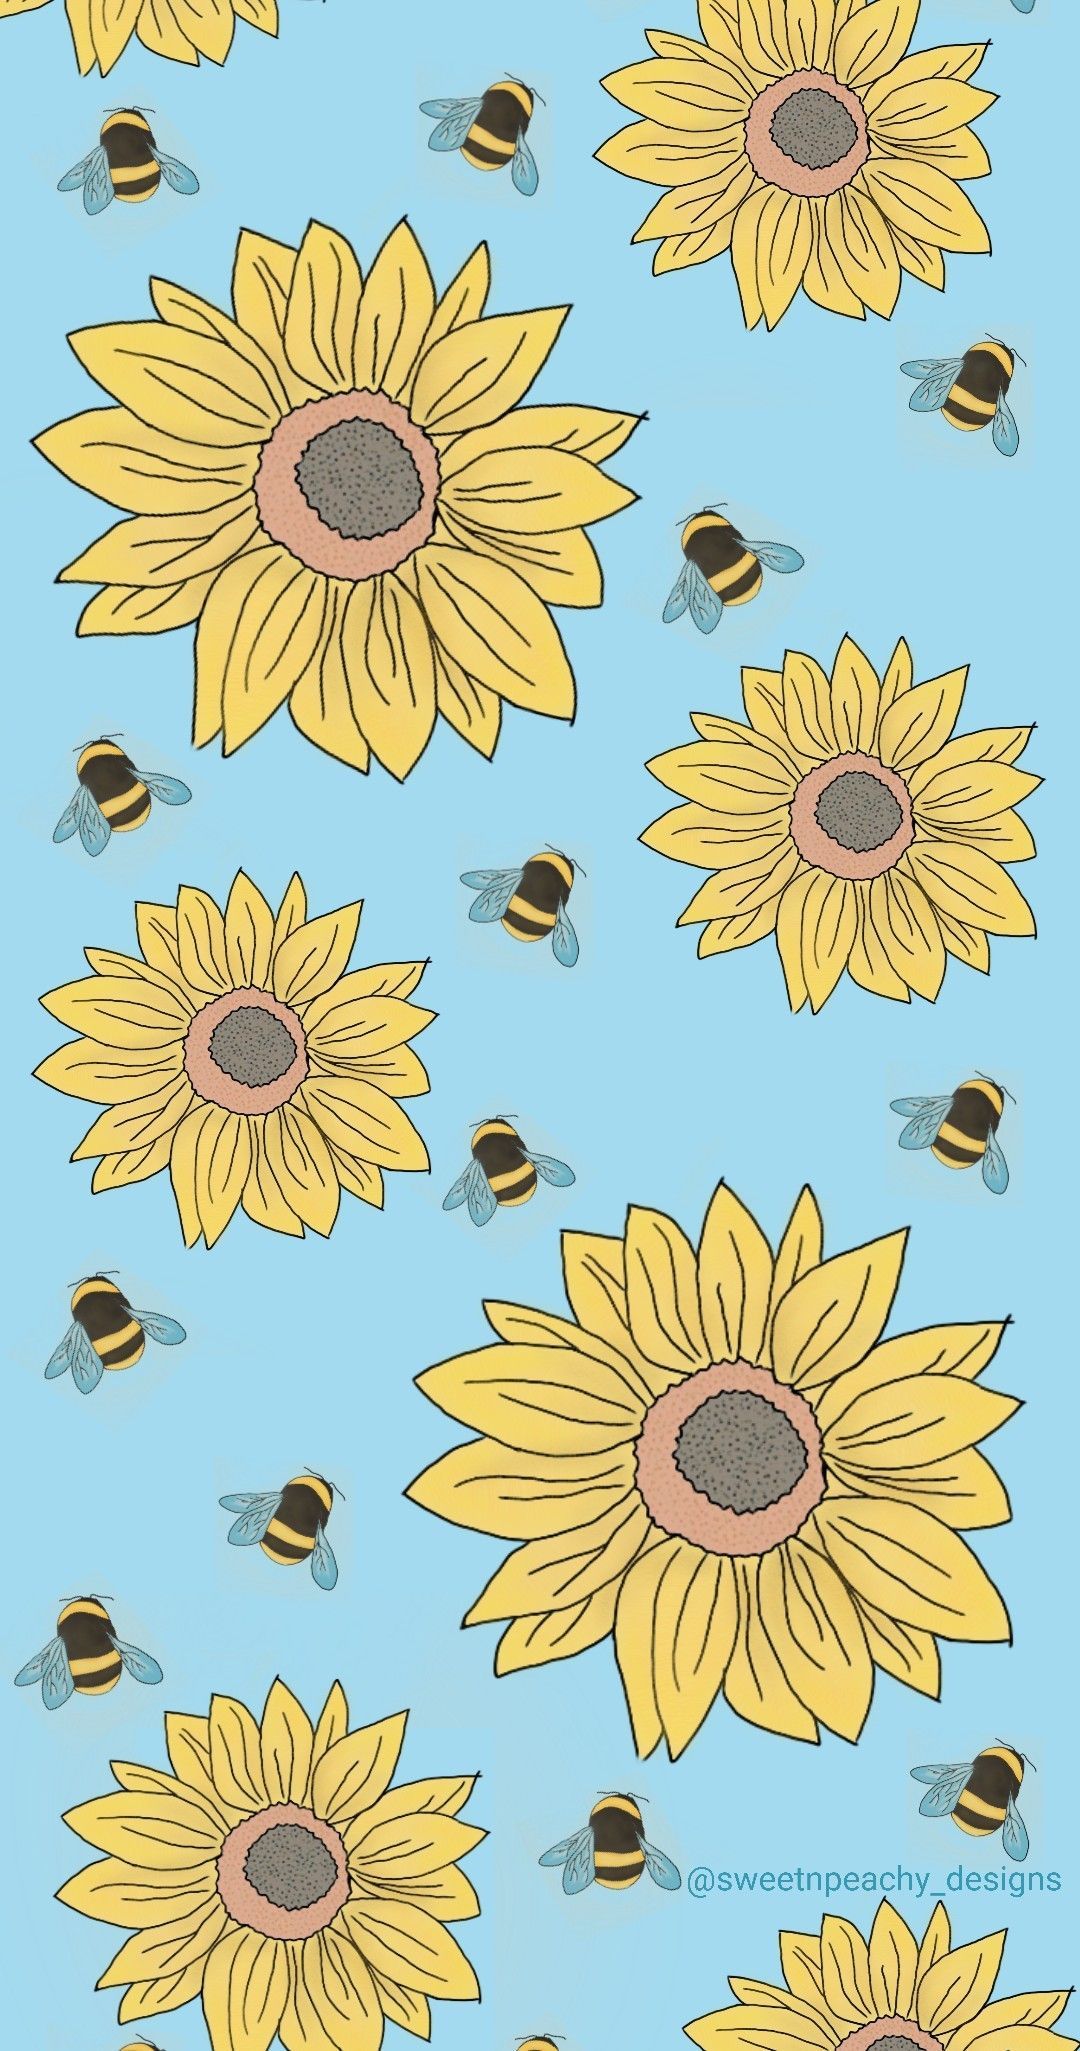 A pattern of sunflowers and bees on blue background - Bee